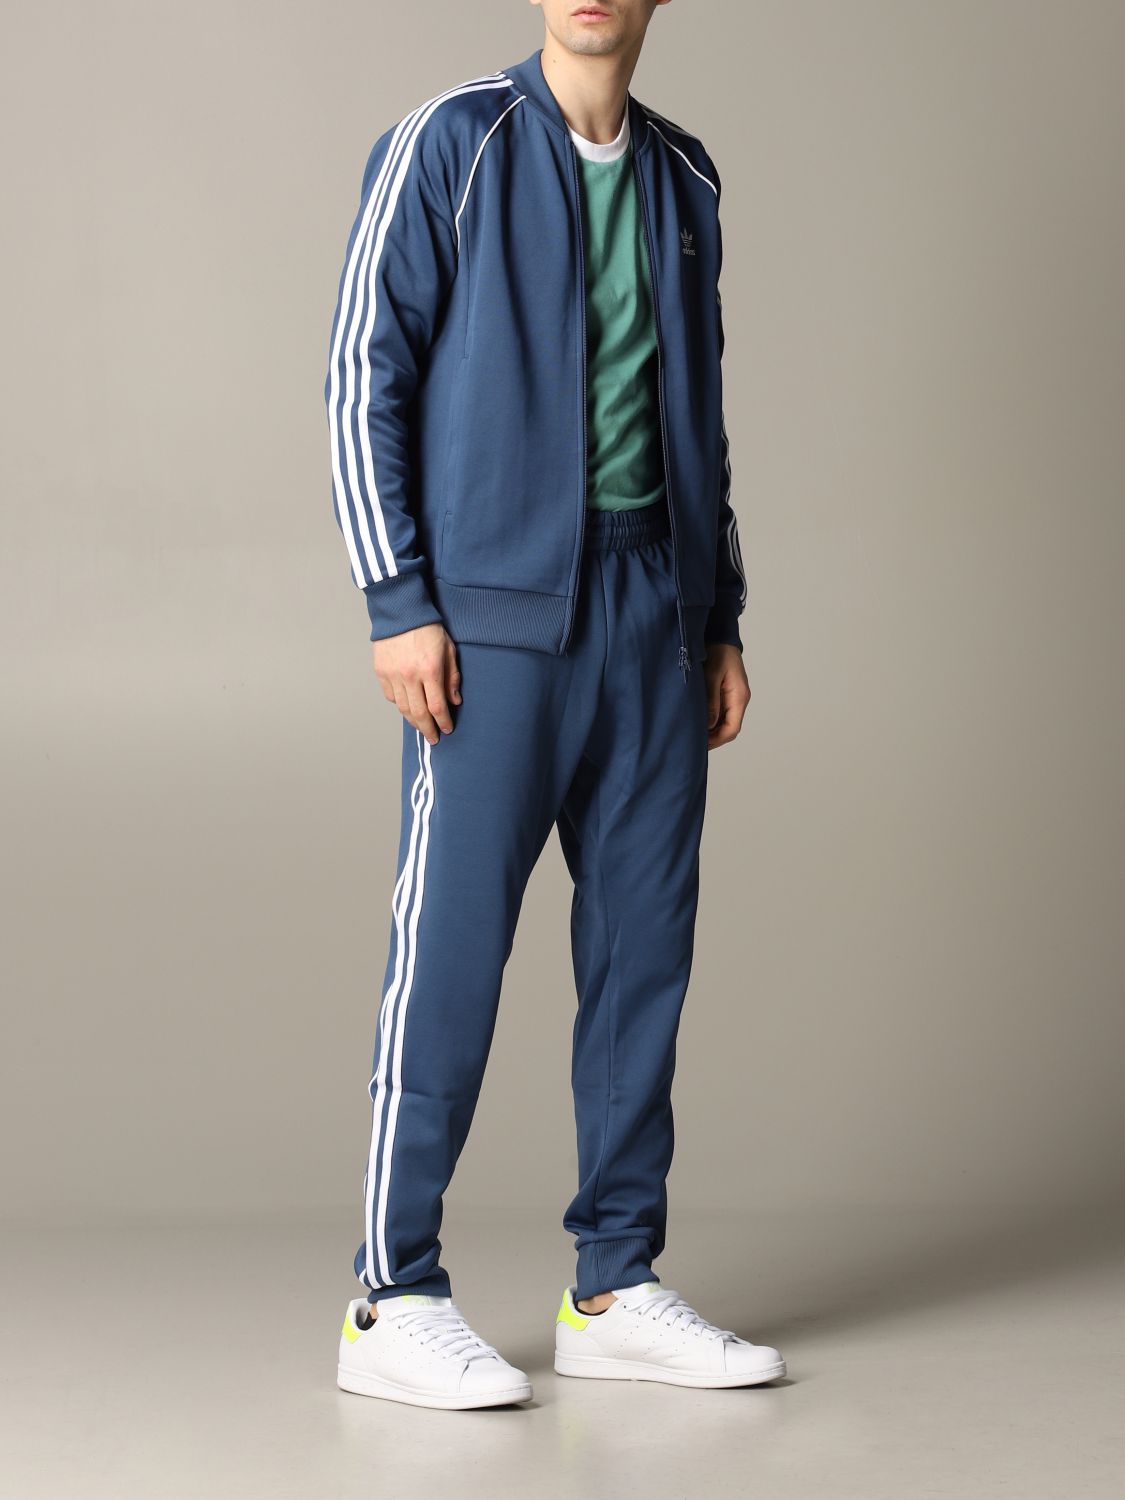 chandal adidas classic hombre